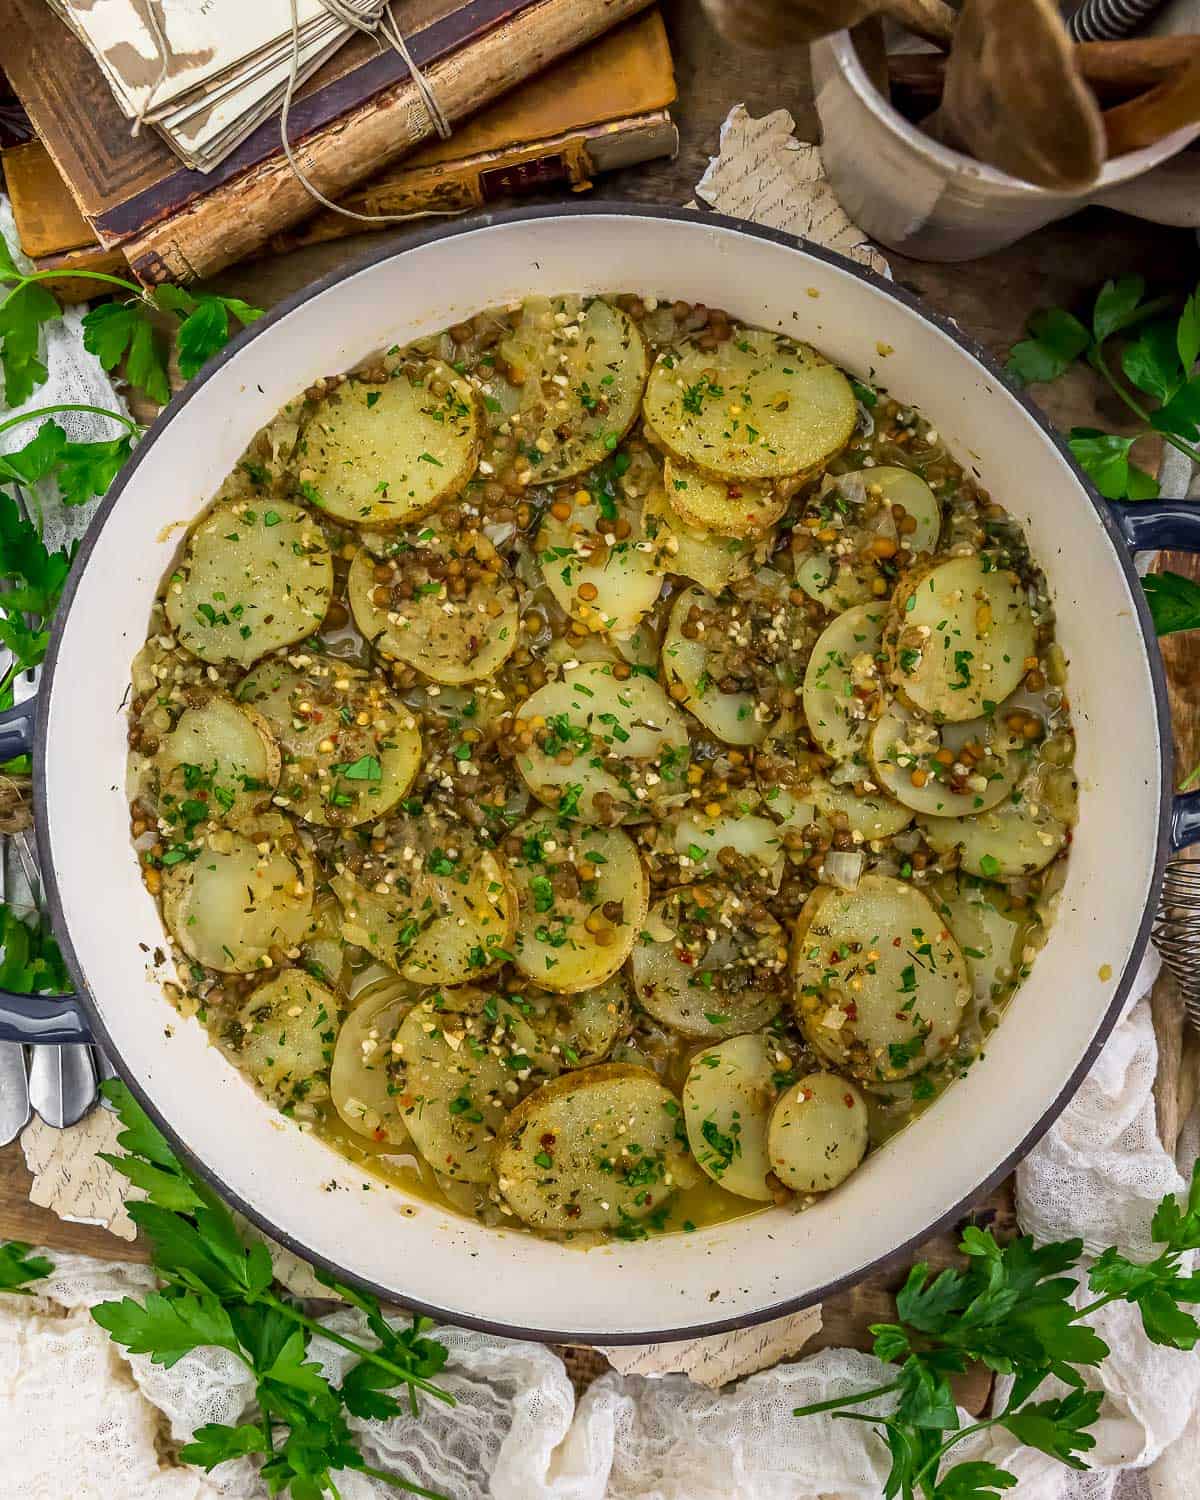 Tablescape of Easy Vegan “Sausage” and Potatoes Skillet